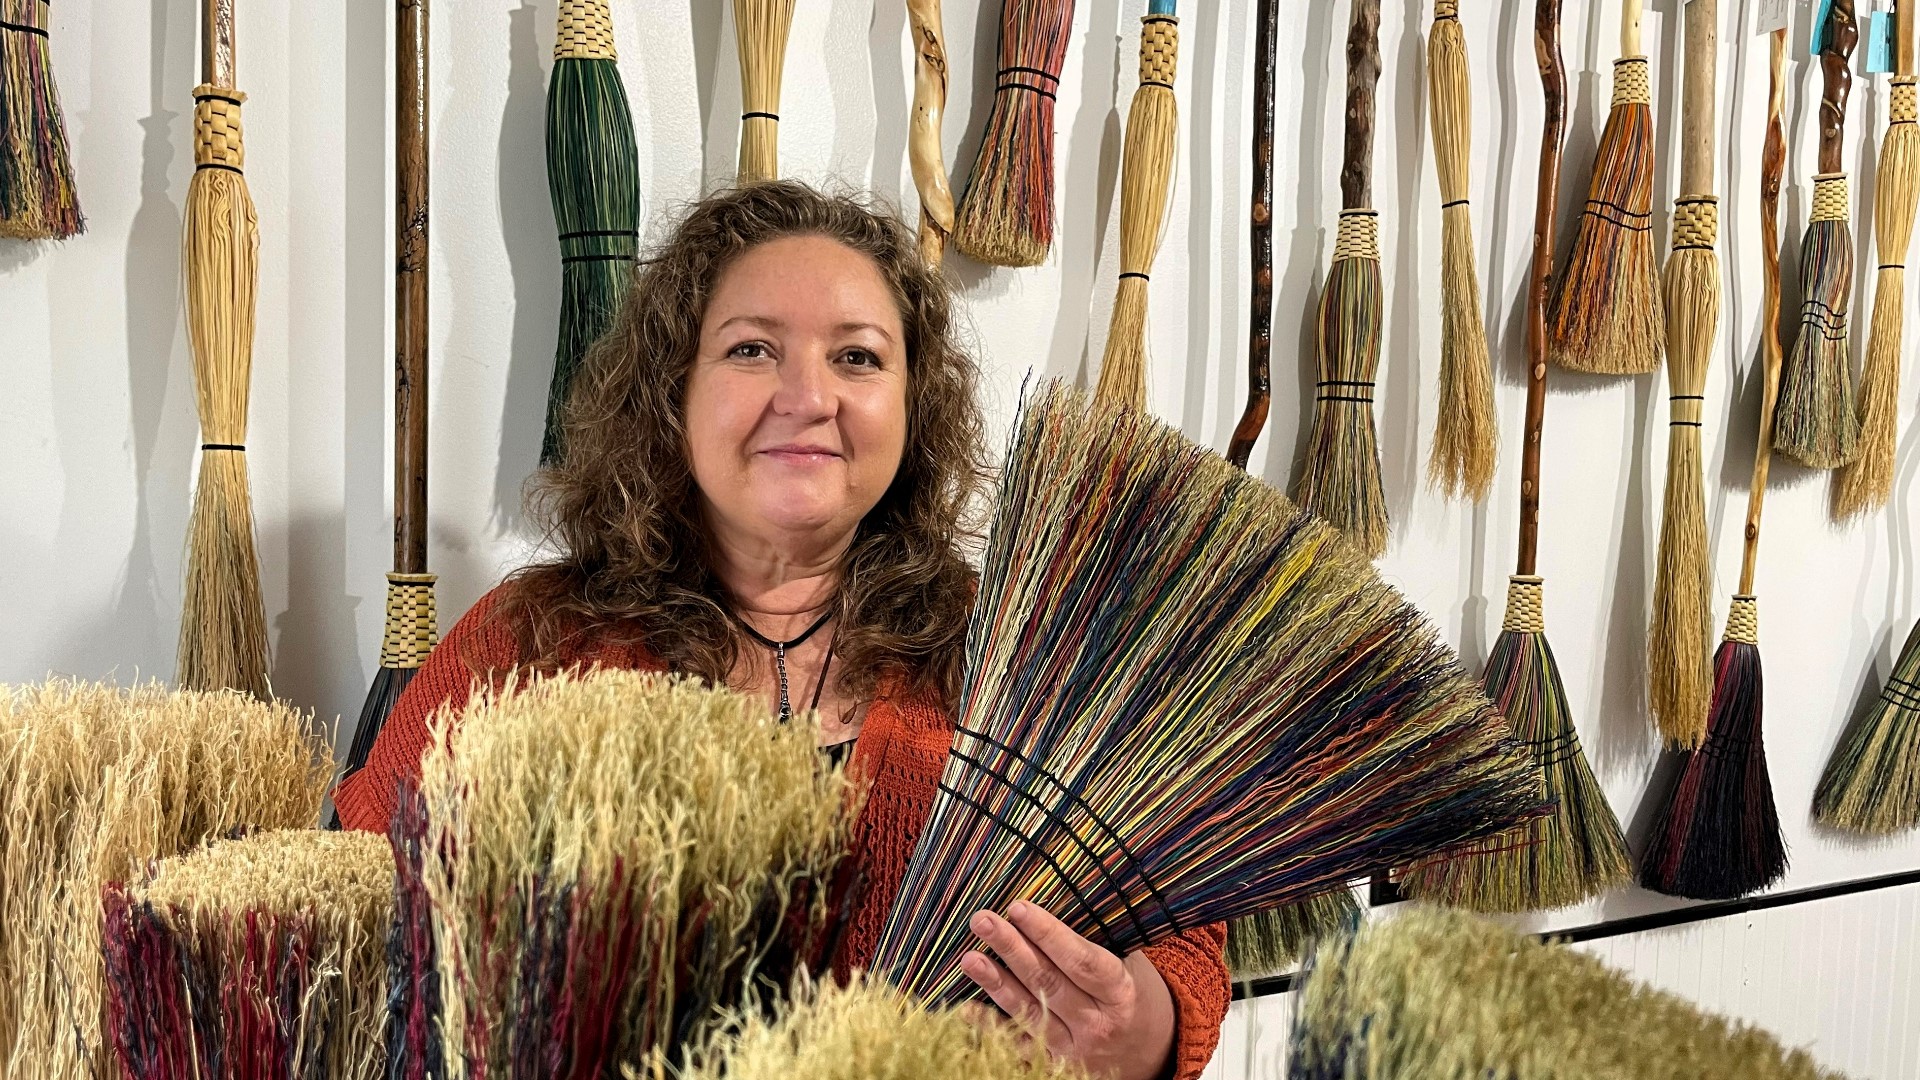 "Wicked Brooms" made on the Olympic Peninsula are fun and functional. #k5evening